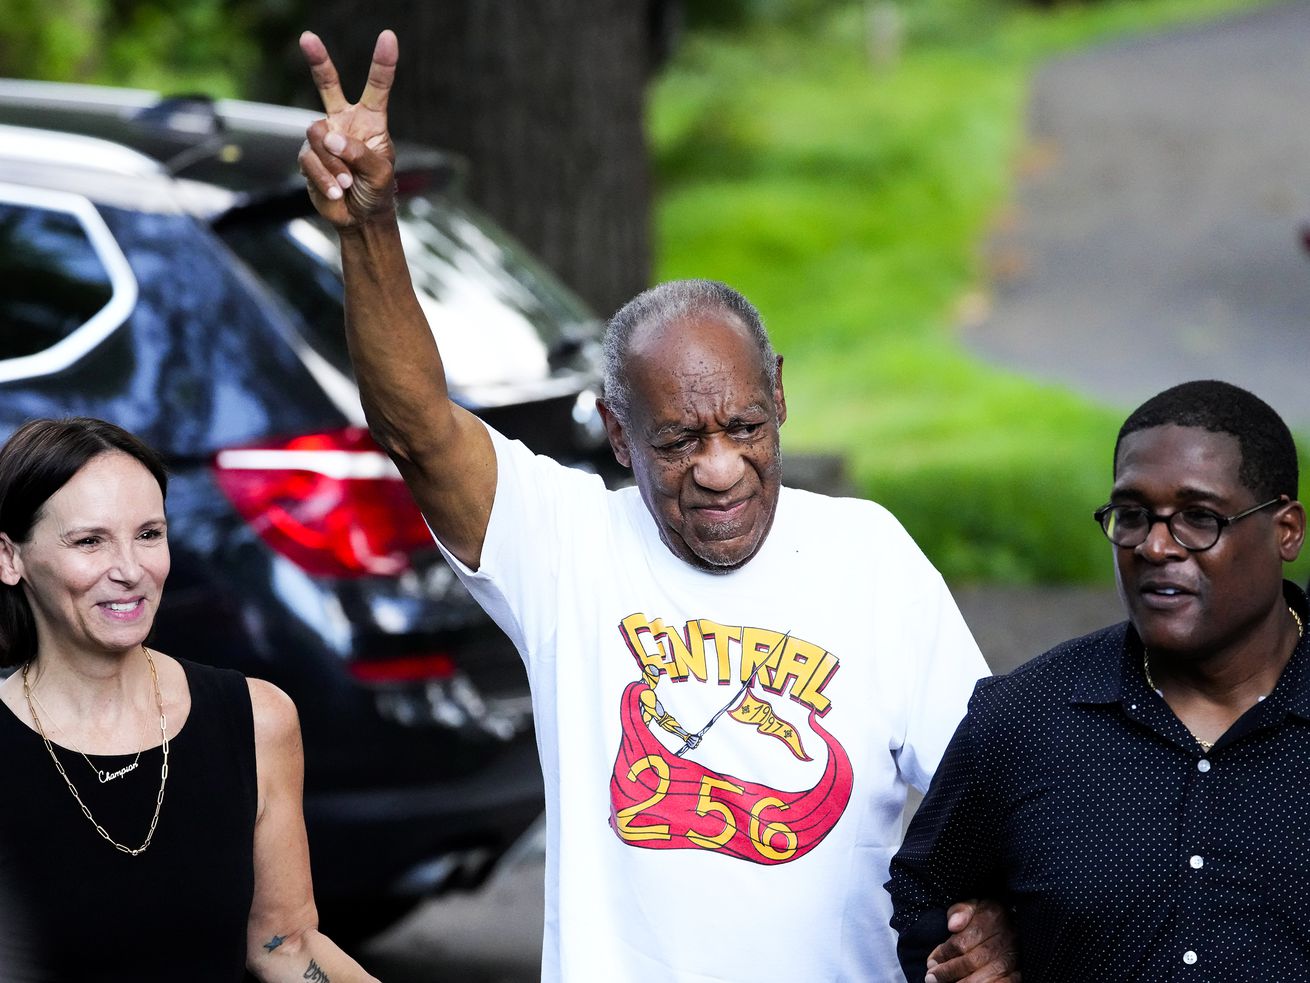 It’s incredibly hard to get a rape conviction. Bill Cosby’s release makes it feel pointless.